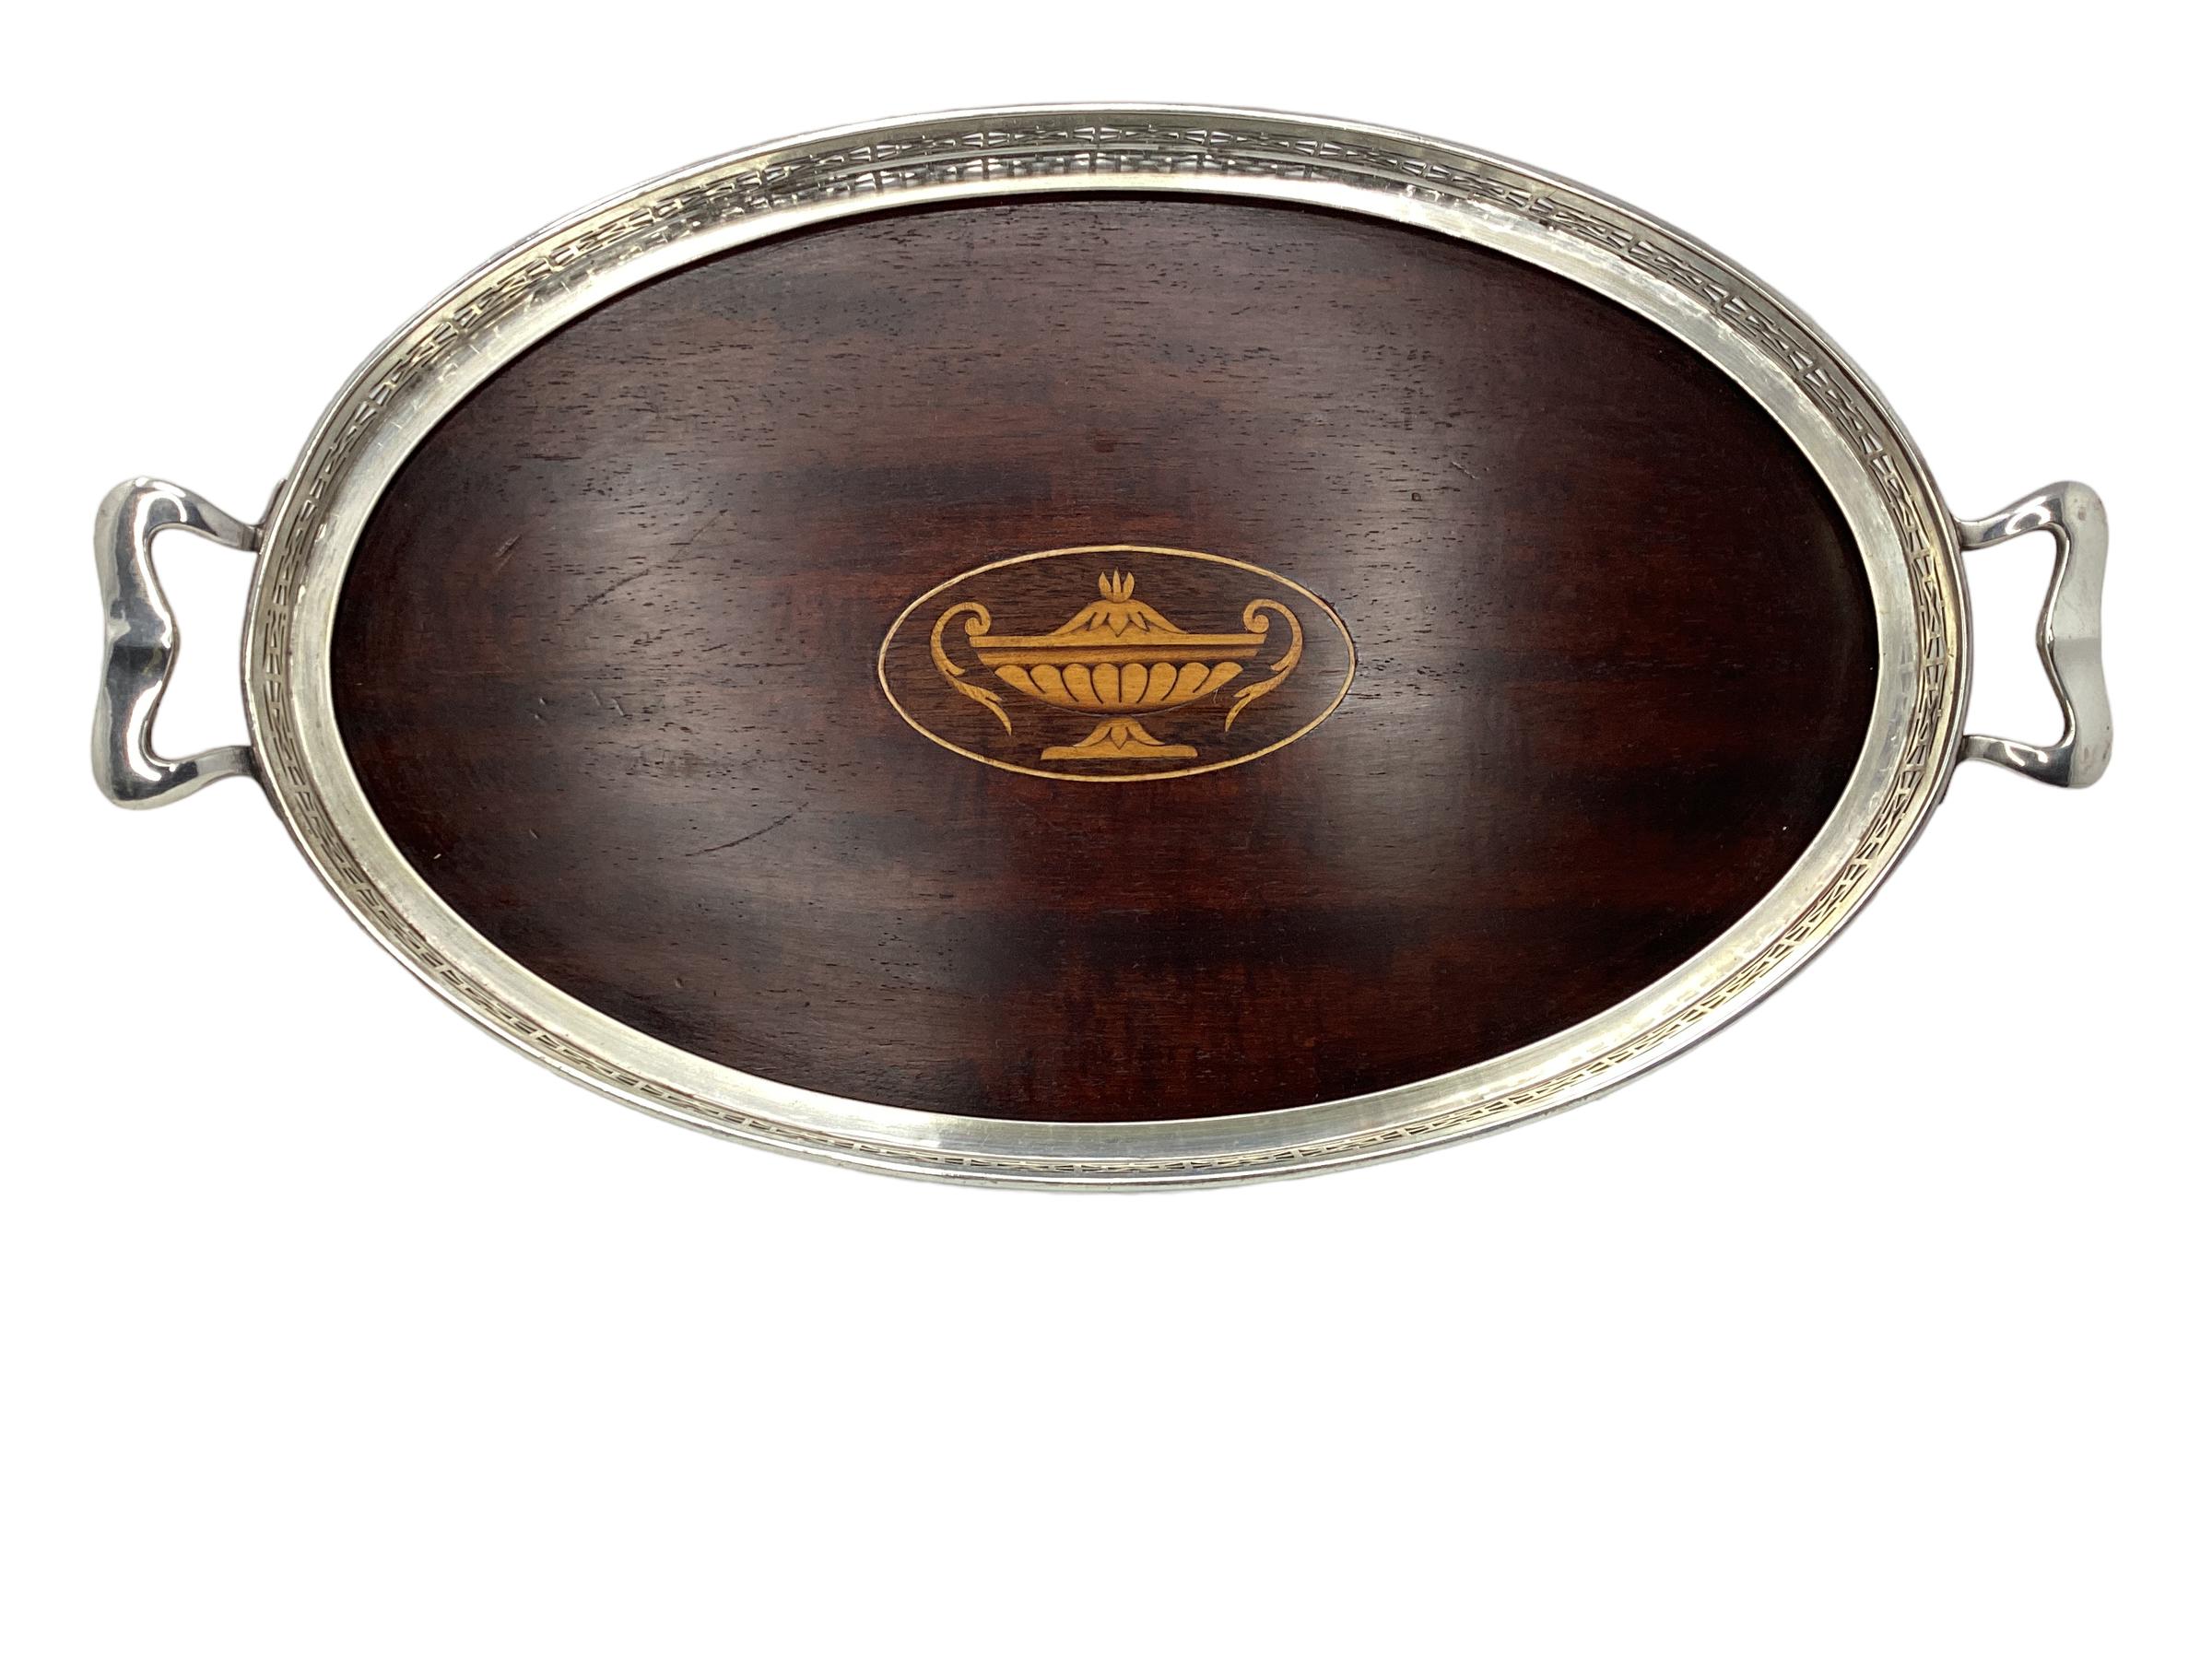 Early 20th Century Inlaid Mahogany Serving Tray With Silver Plate Gallery. Marked by the makers mark 